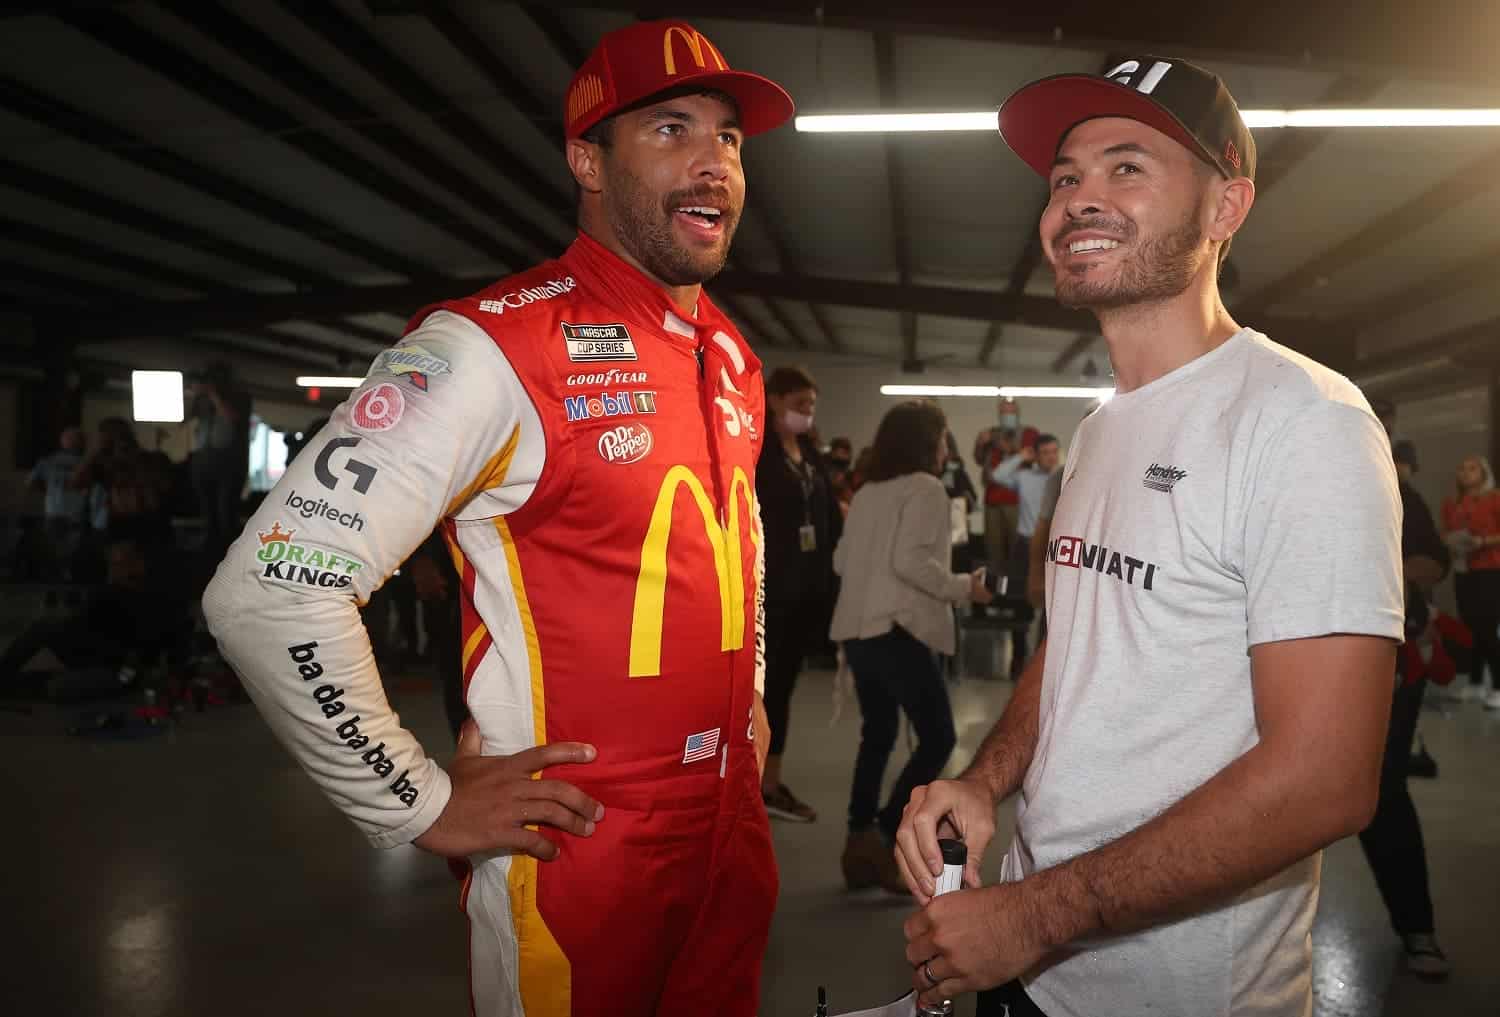 Bubba Wallace talks with Kyle Larson in Victory Lane after winning the rain-shortened NASCAR Cup Series YellaWood 500 at Talladega Superspeedway on Oct. 4, 2021. | Chris Graythen/Getty Images